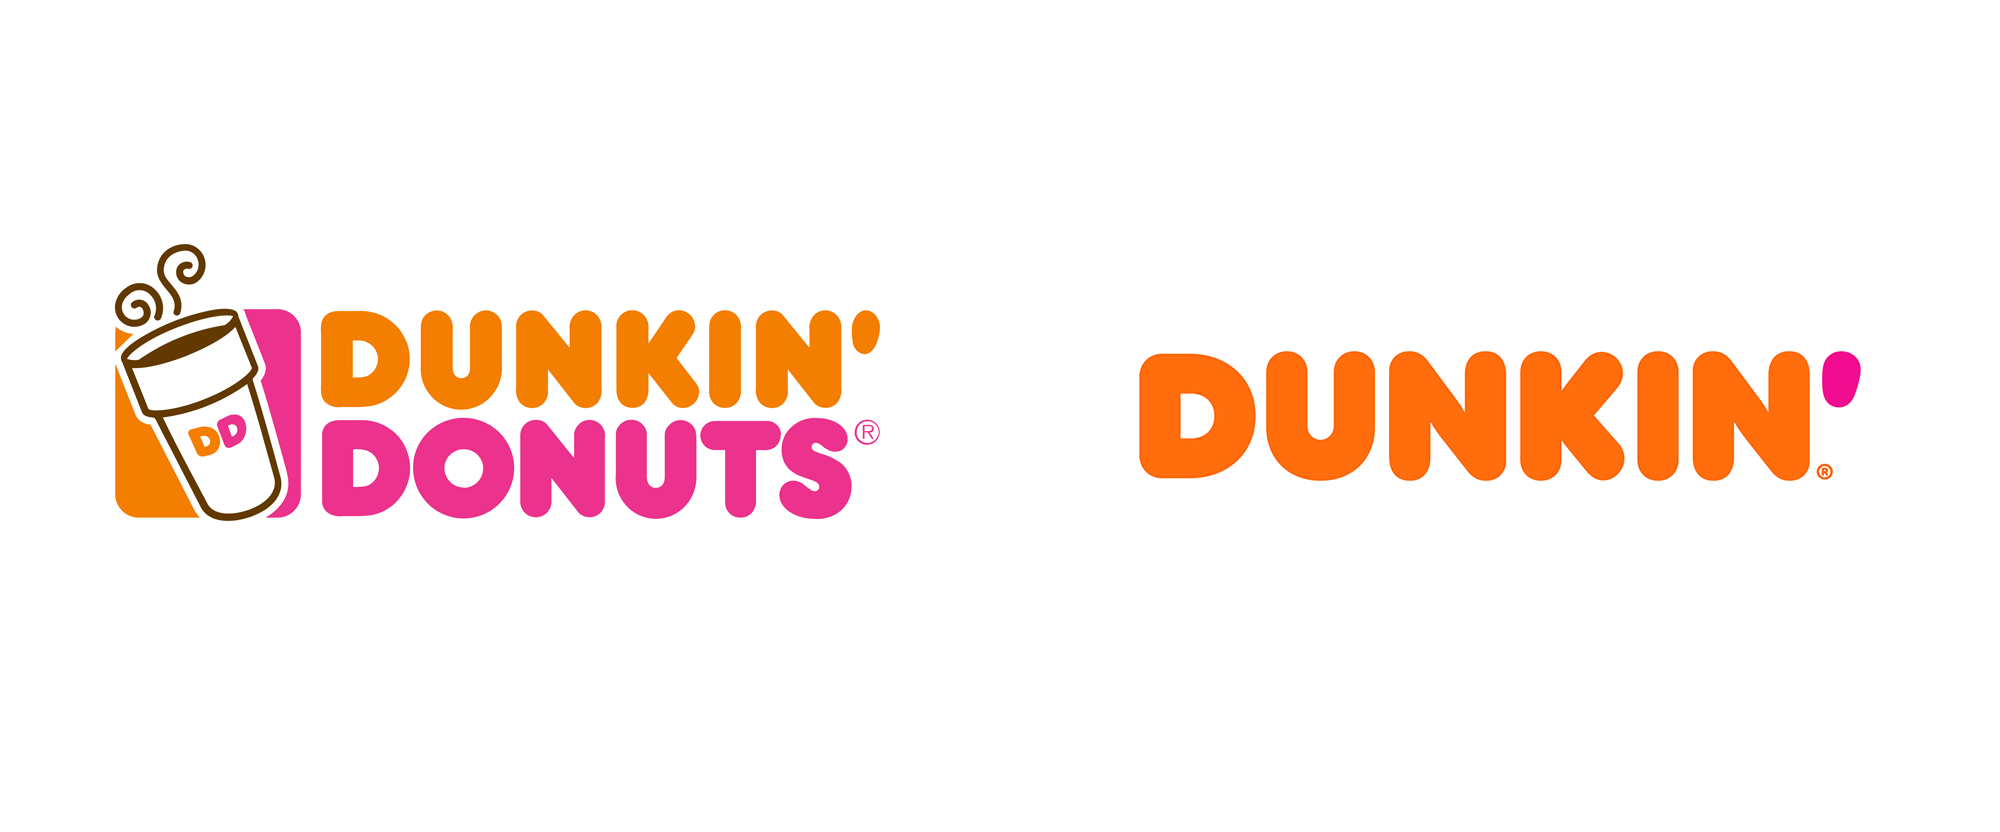 New Name and Logo for Dunkin’ by Jones Knowles Ritchie